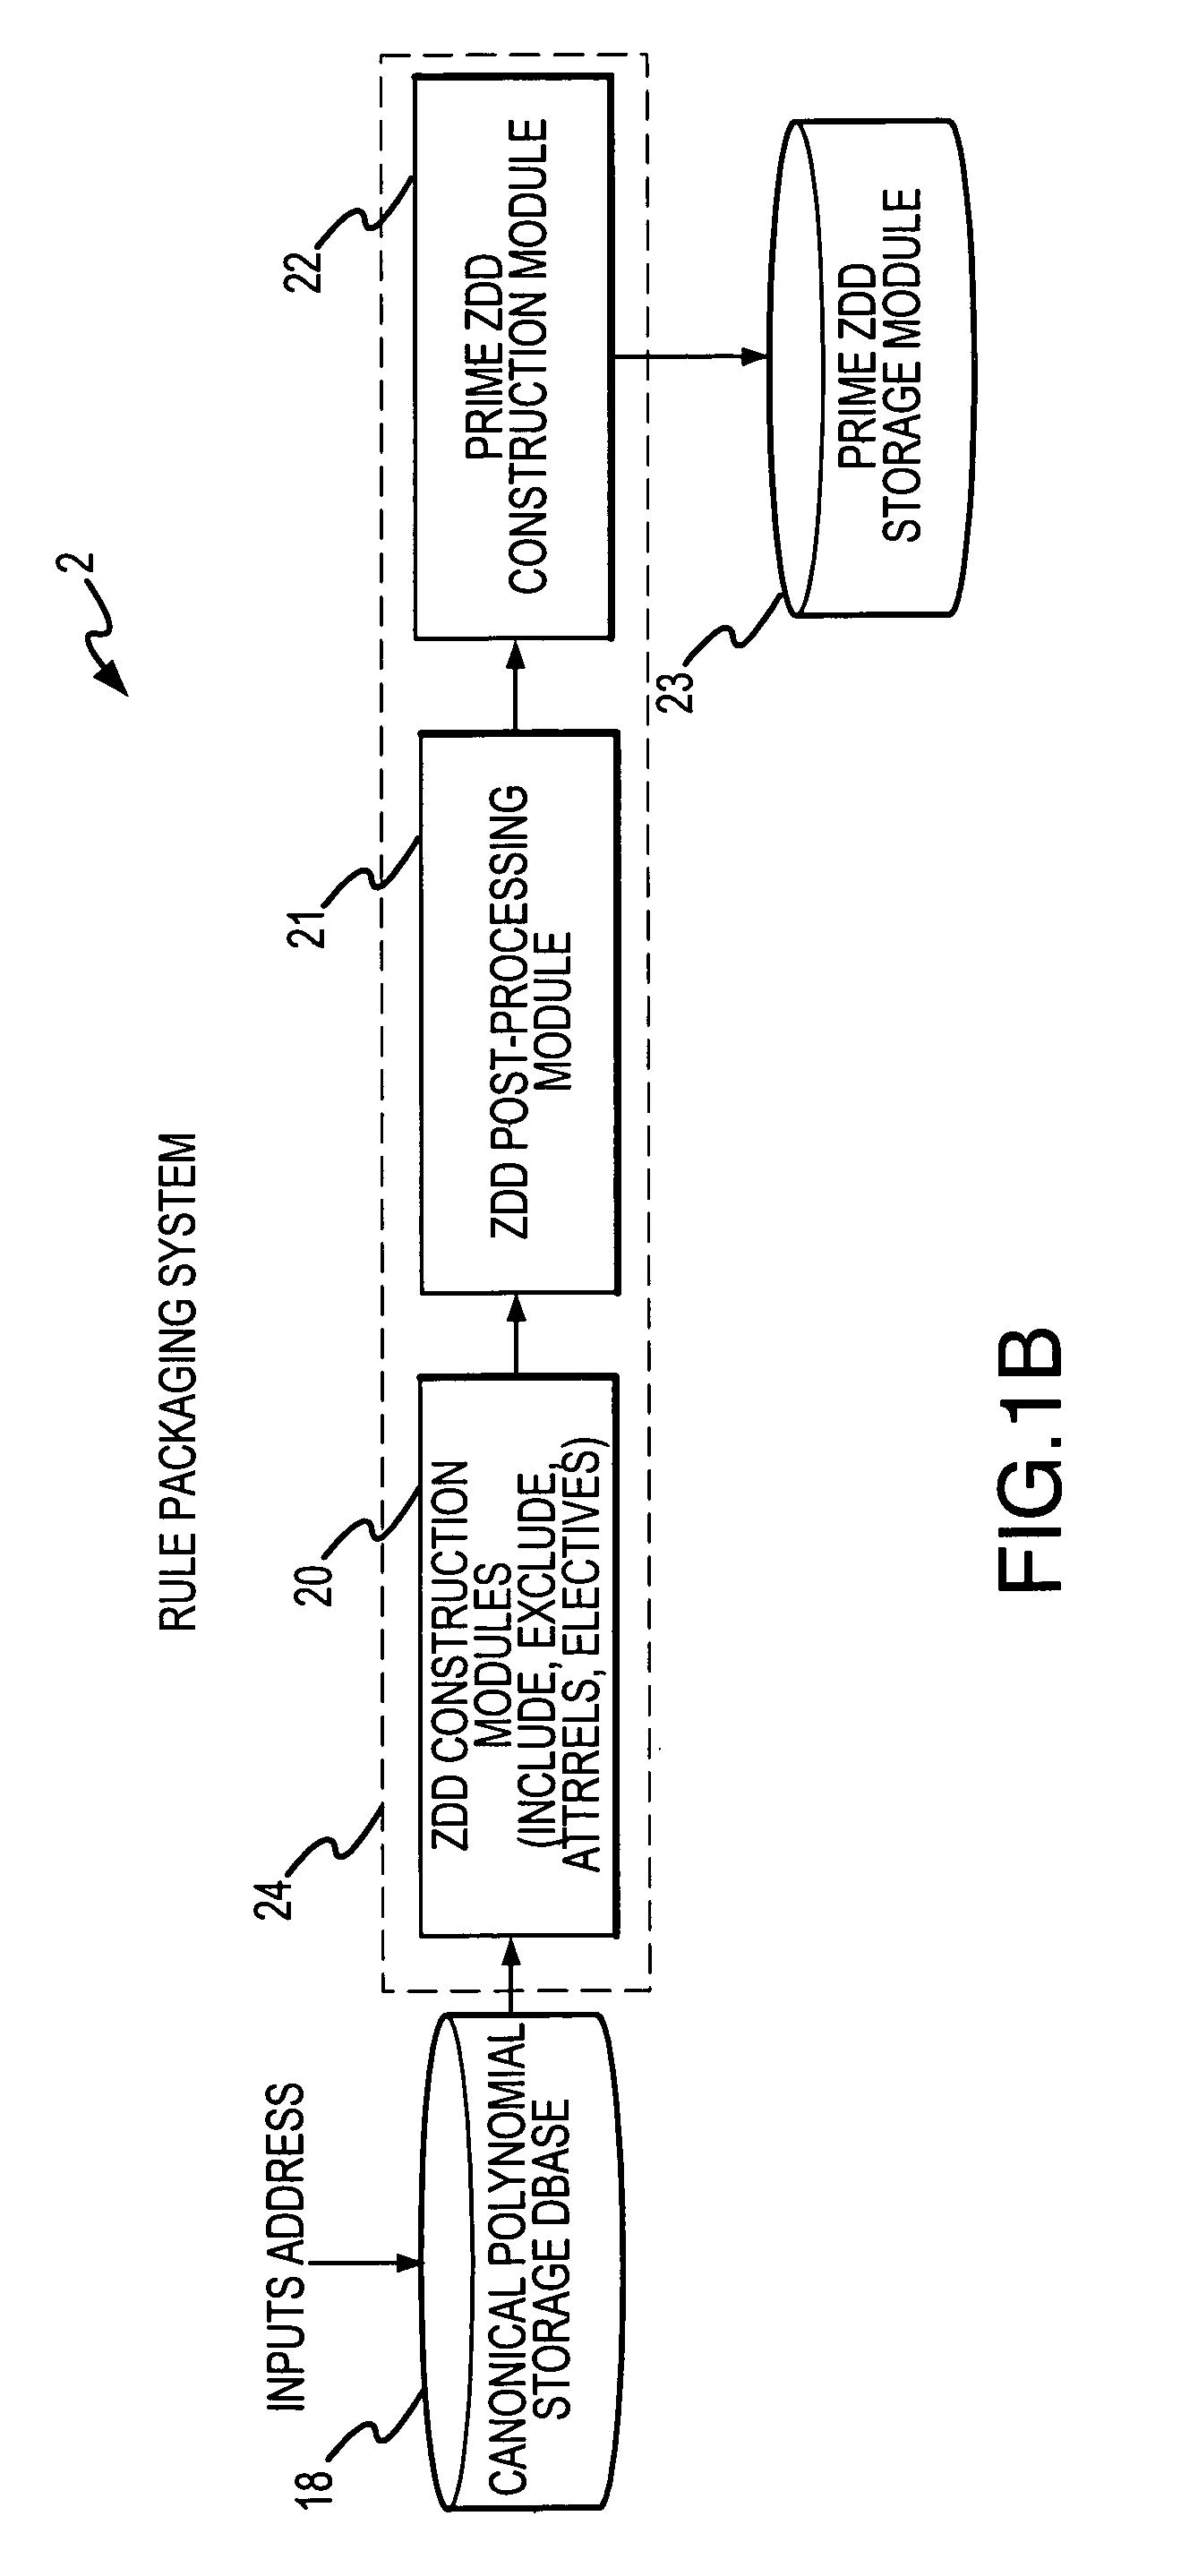 Method and apparatus using automated rule processing to configure a product or service